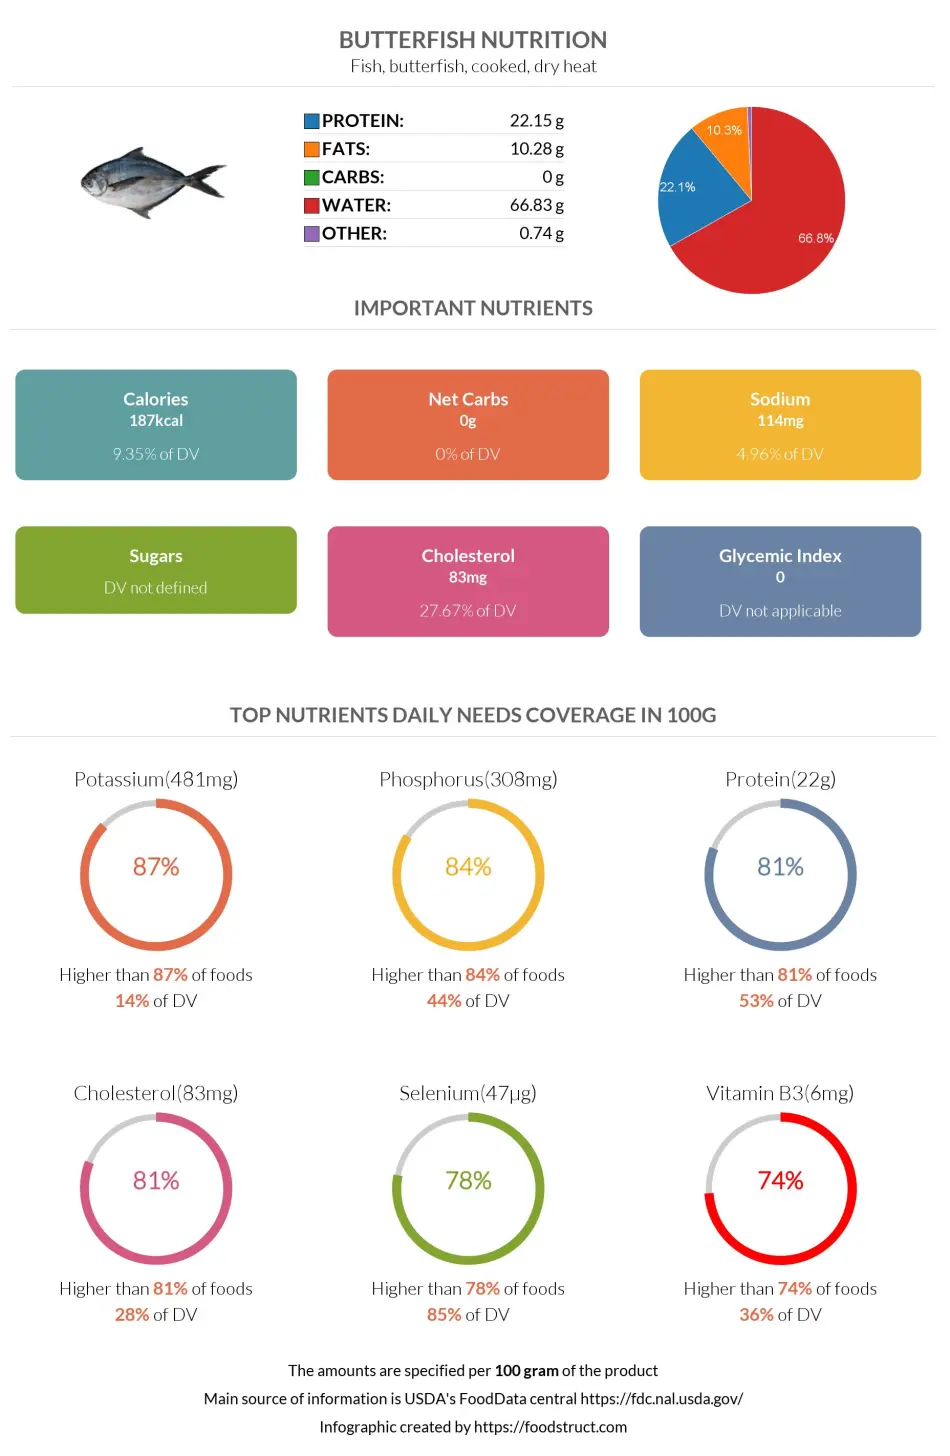 Butterfish nutrition infographic